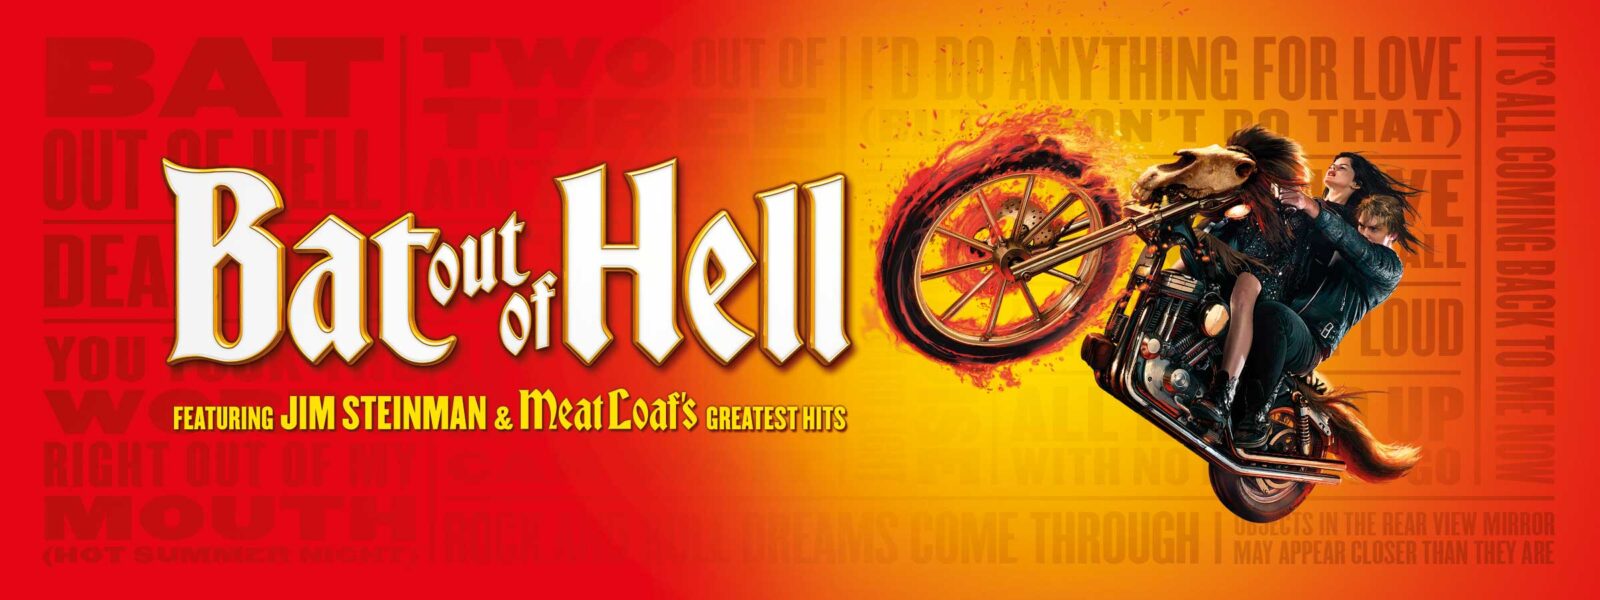 The Rock MusicalBat Out Of Hell  presented by TEG Dainty